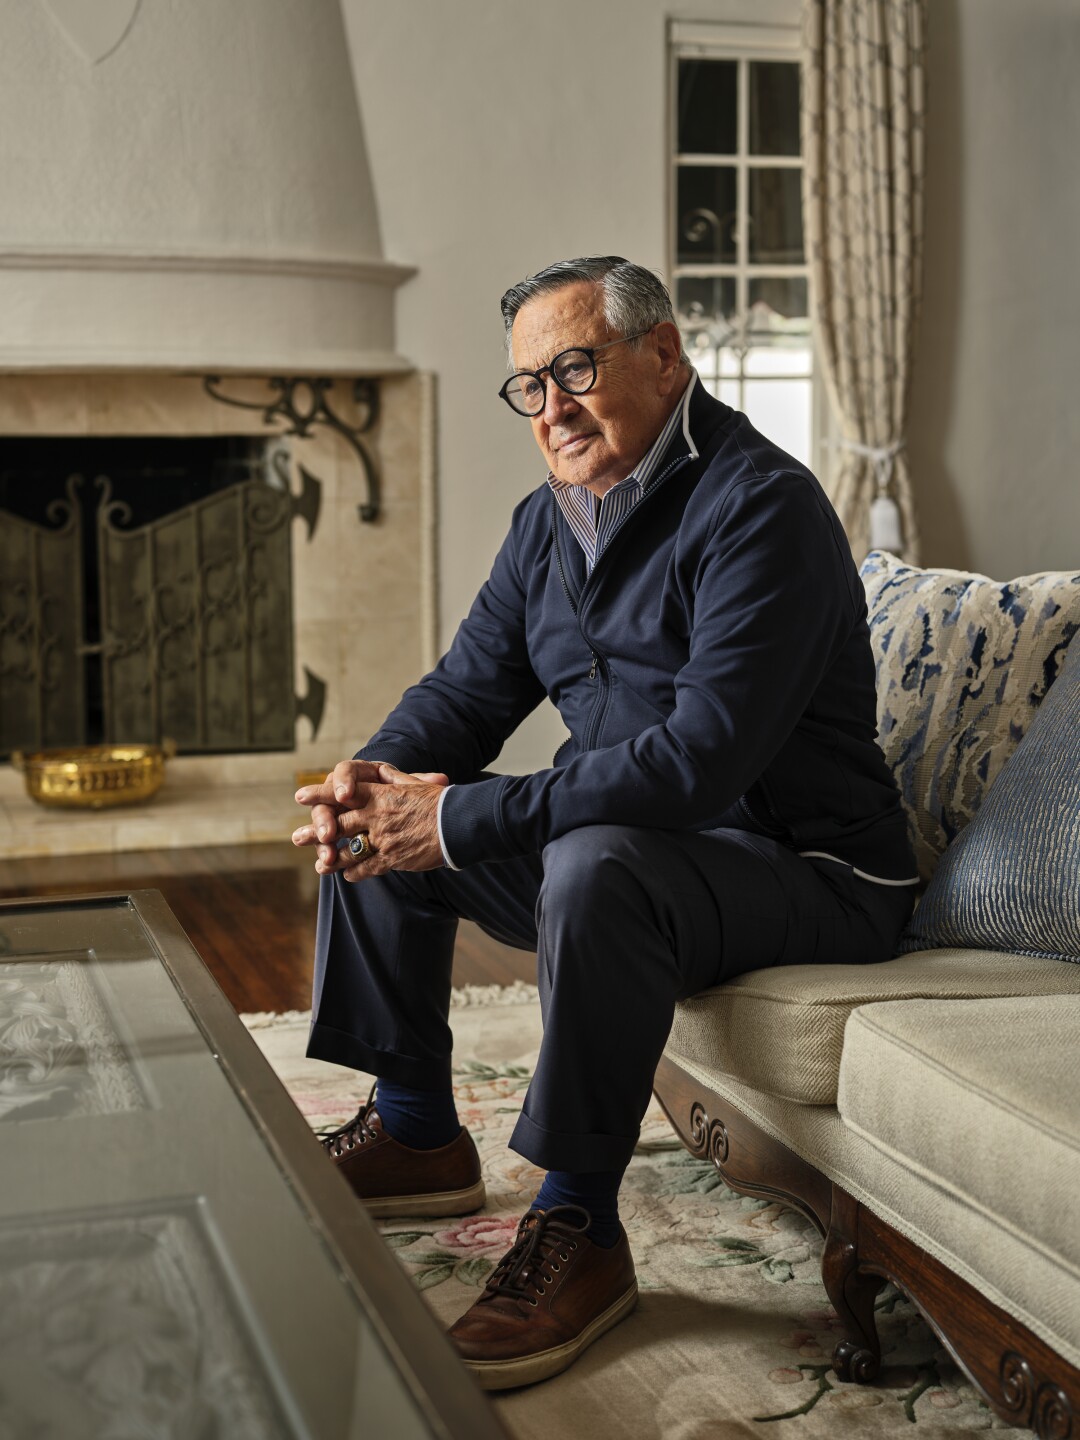 Jaime Jarrin, TV presenter for the Spanish-language Los Angeles Dodgers, poses for a portrait at home.